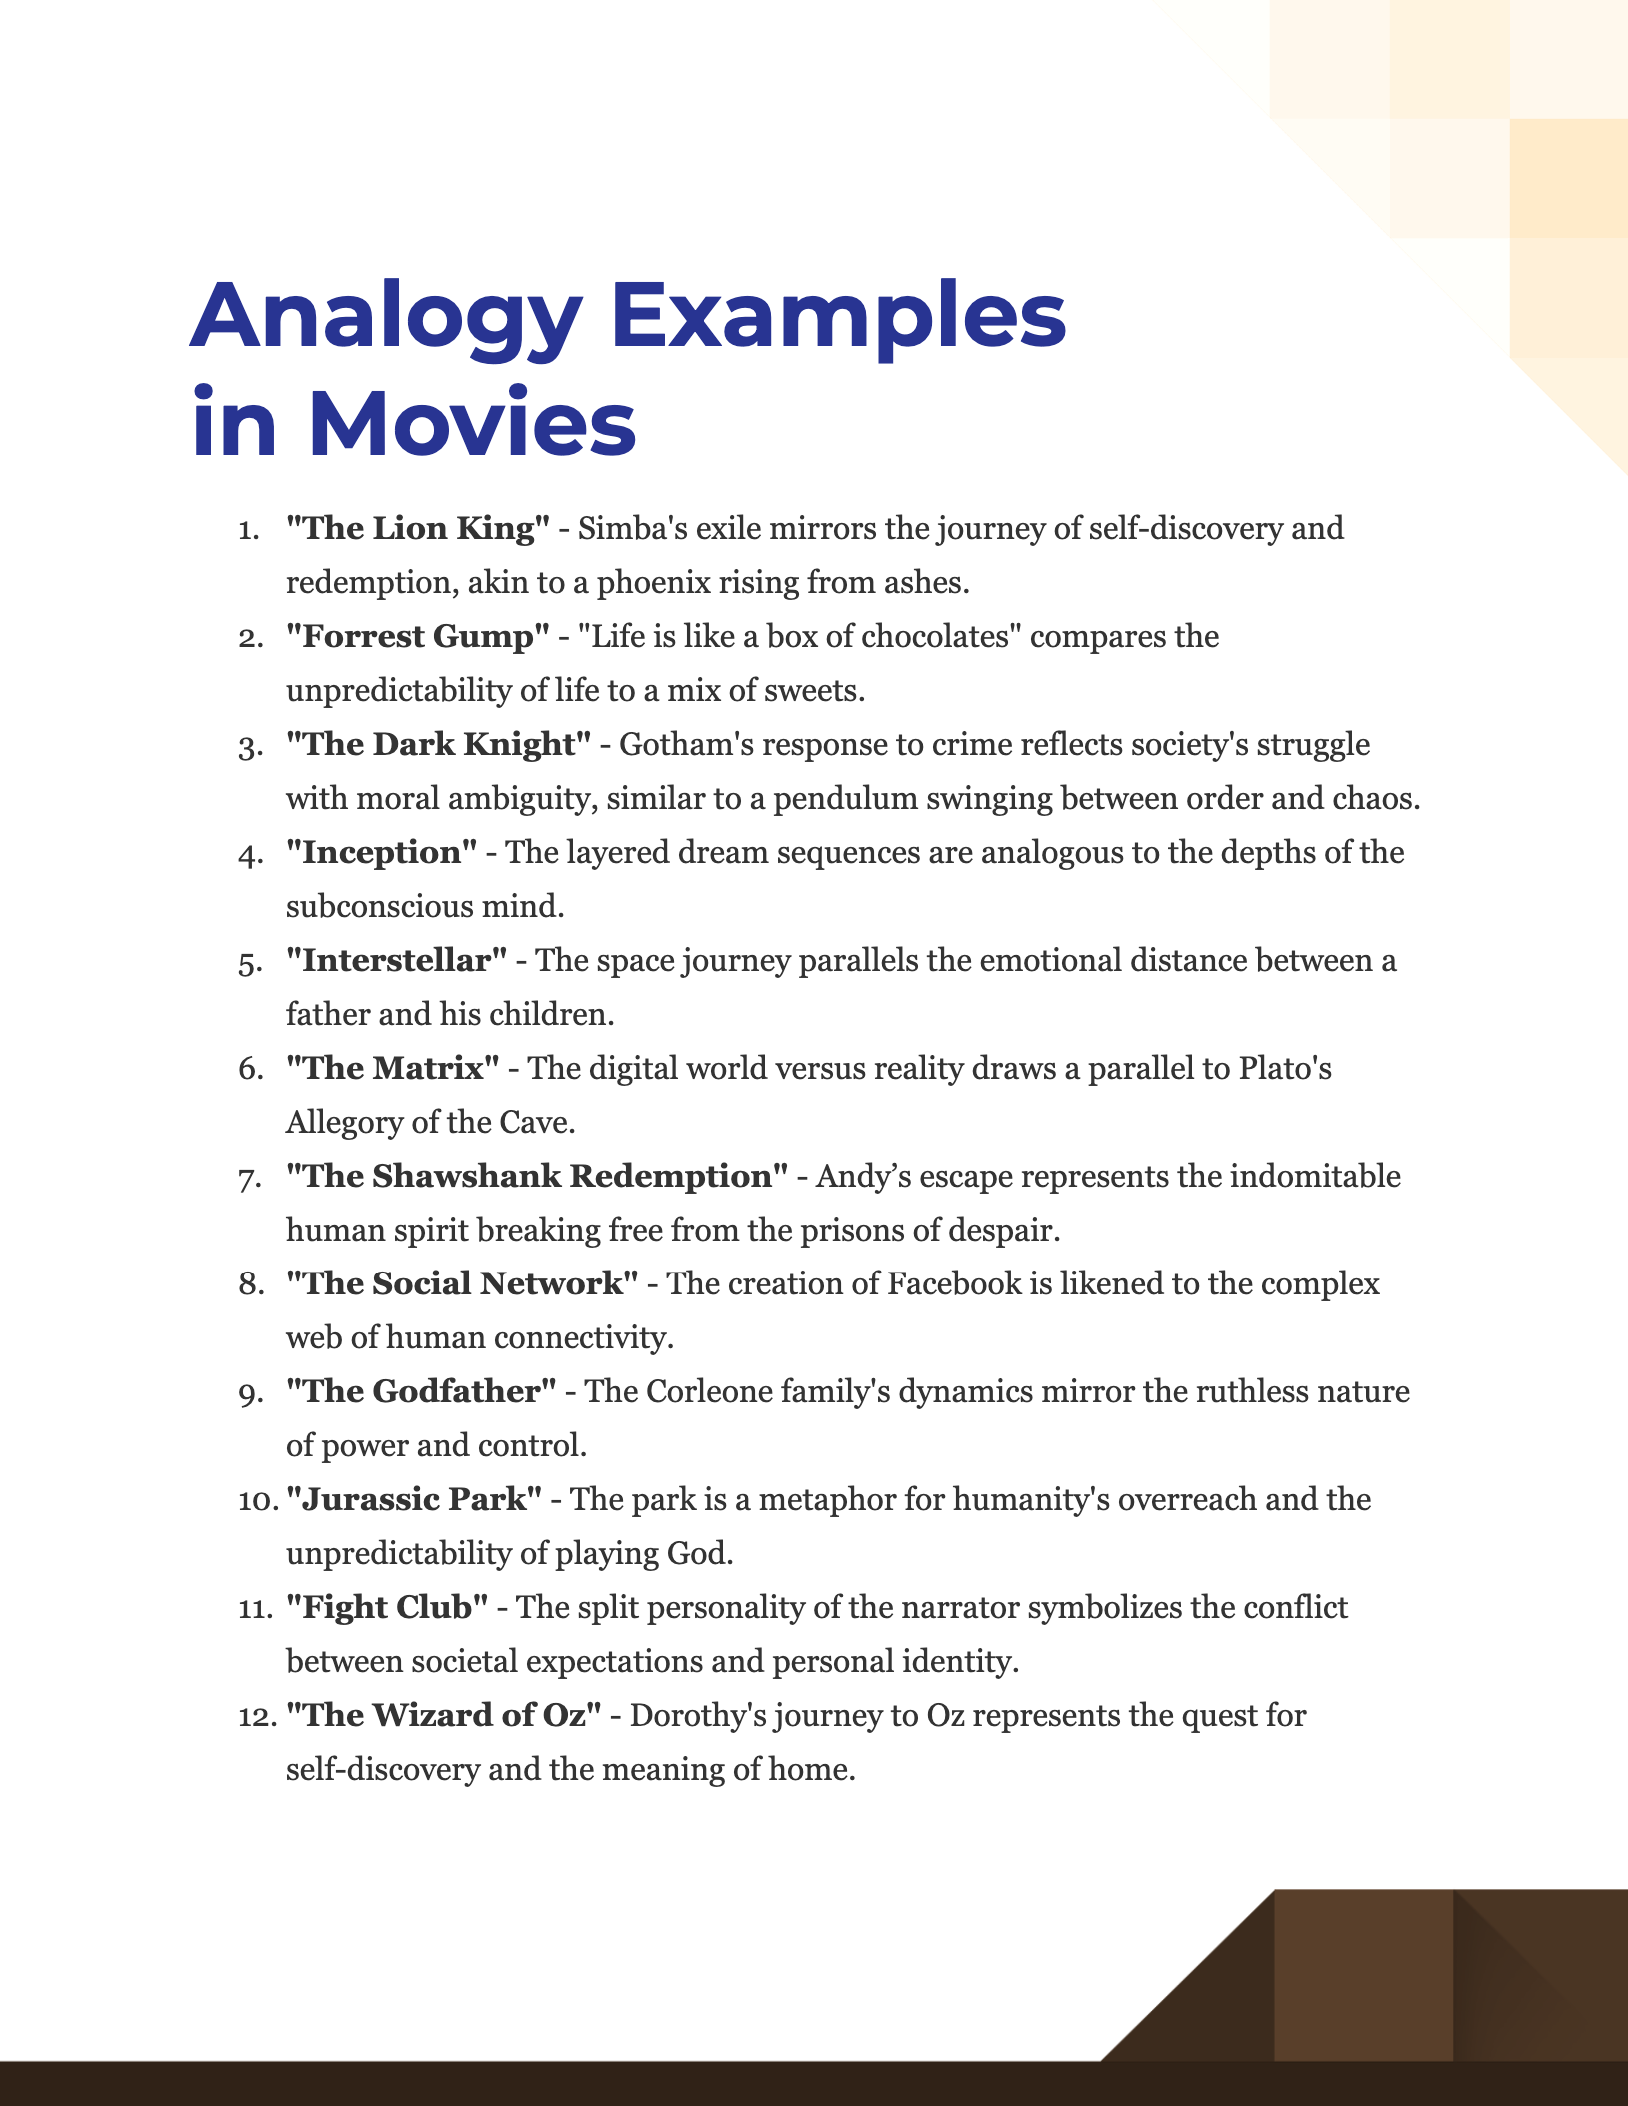 Analogy Examples in Movies